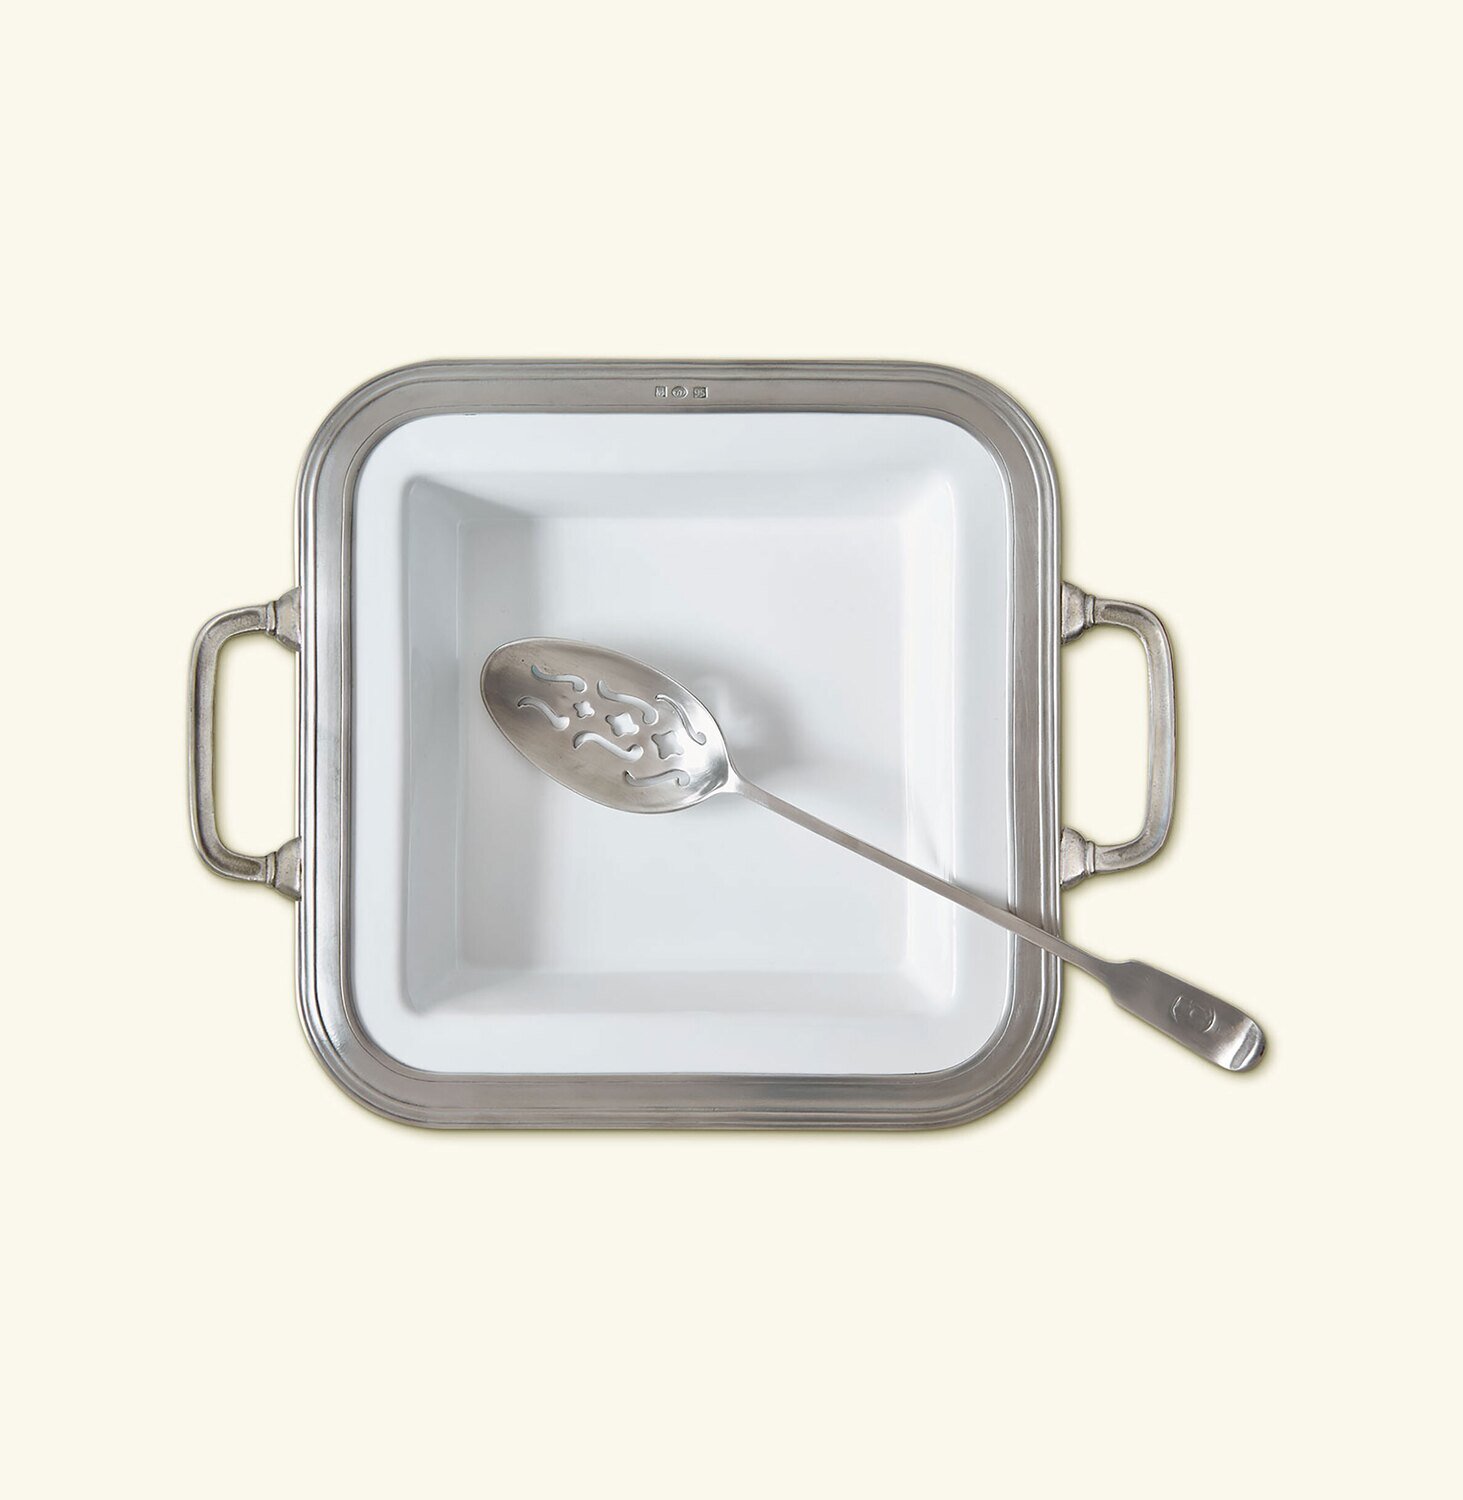 Match Pewter Gianna Square Serving Dish with Handles A887.1